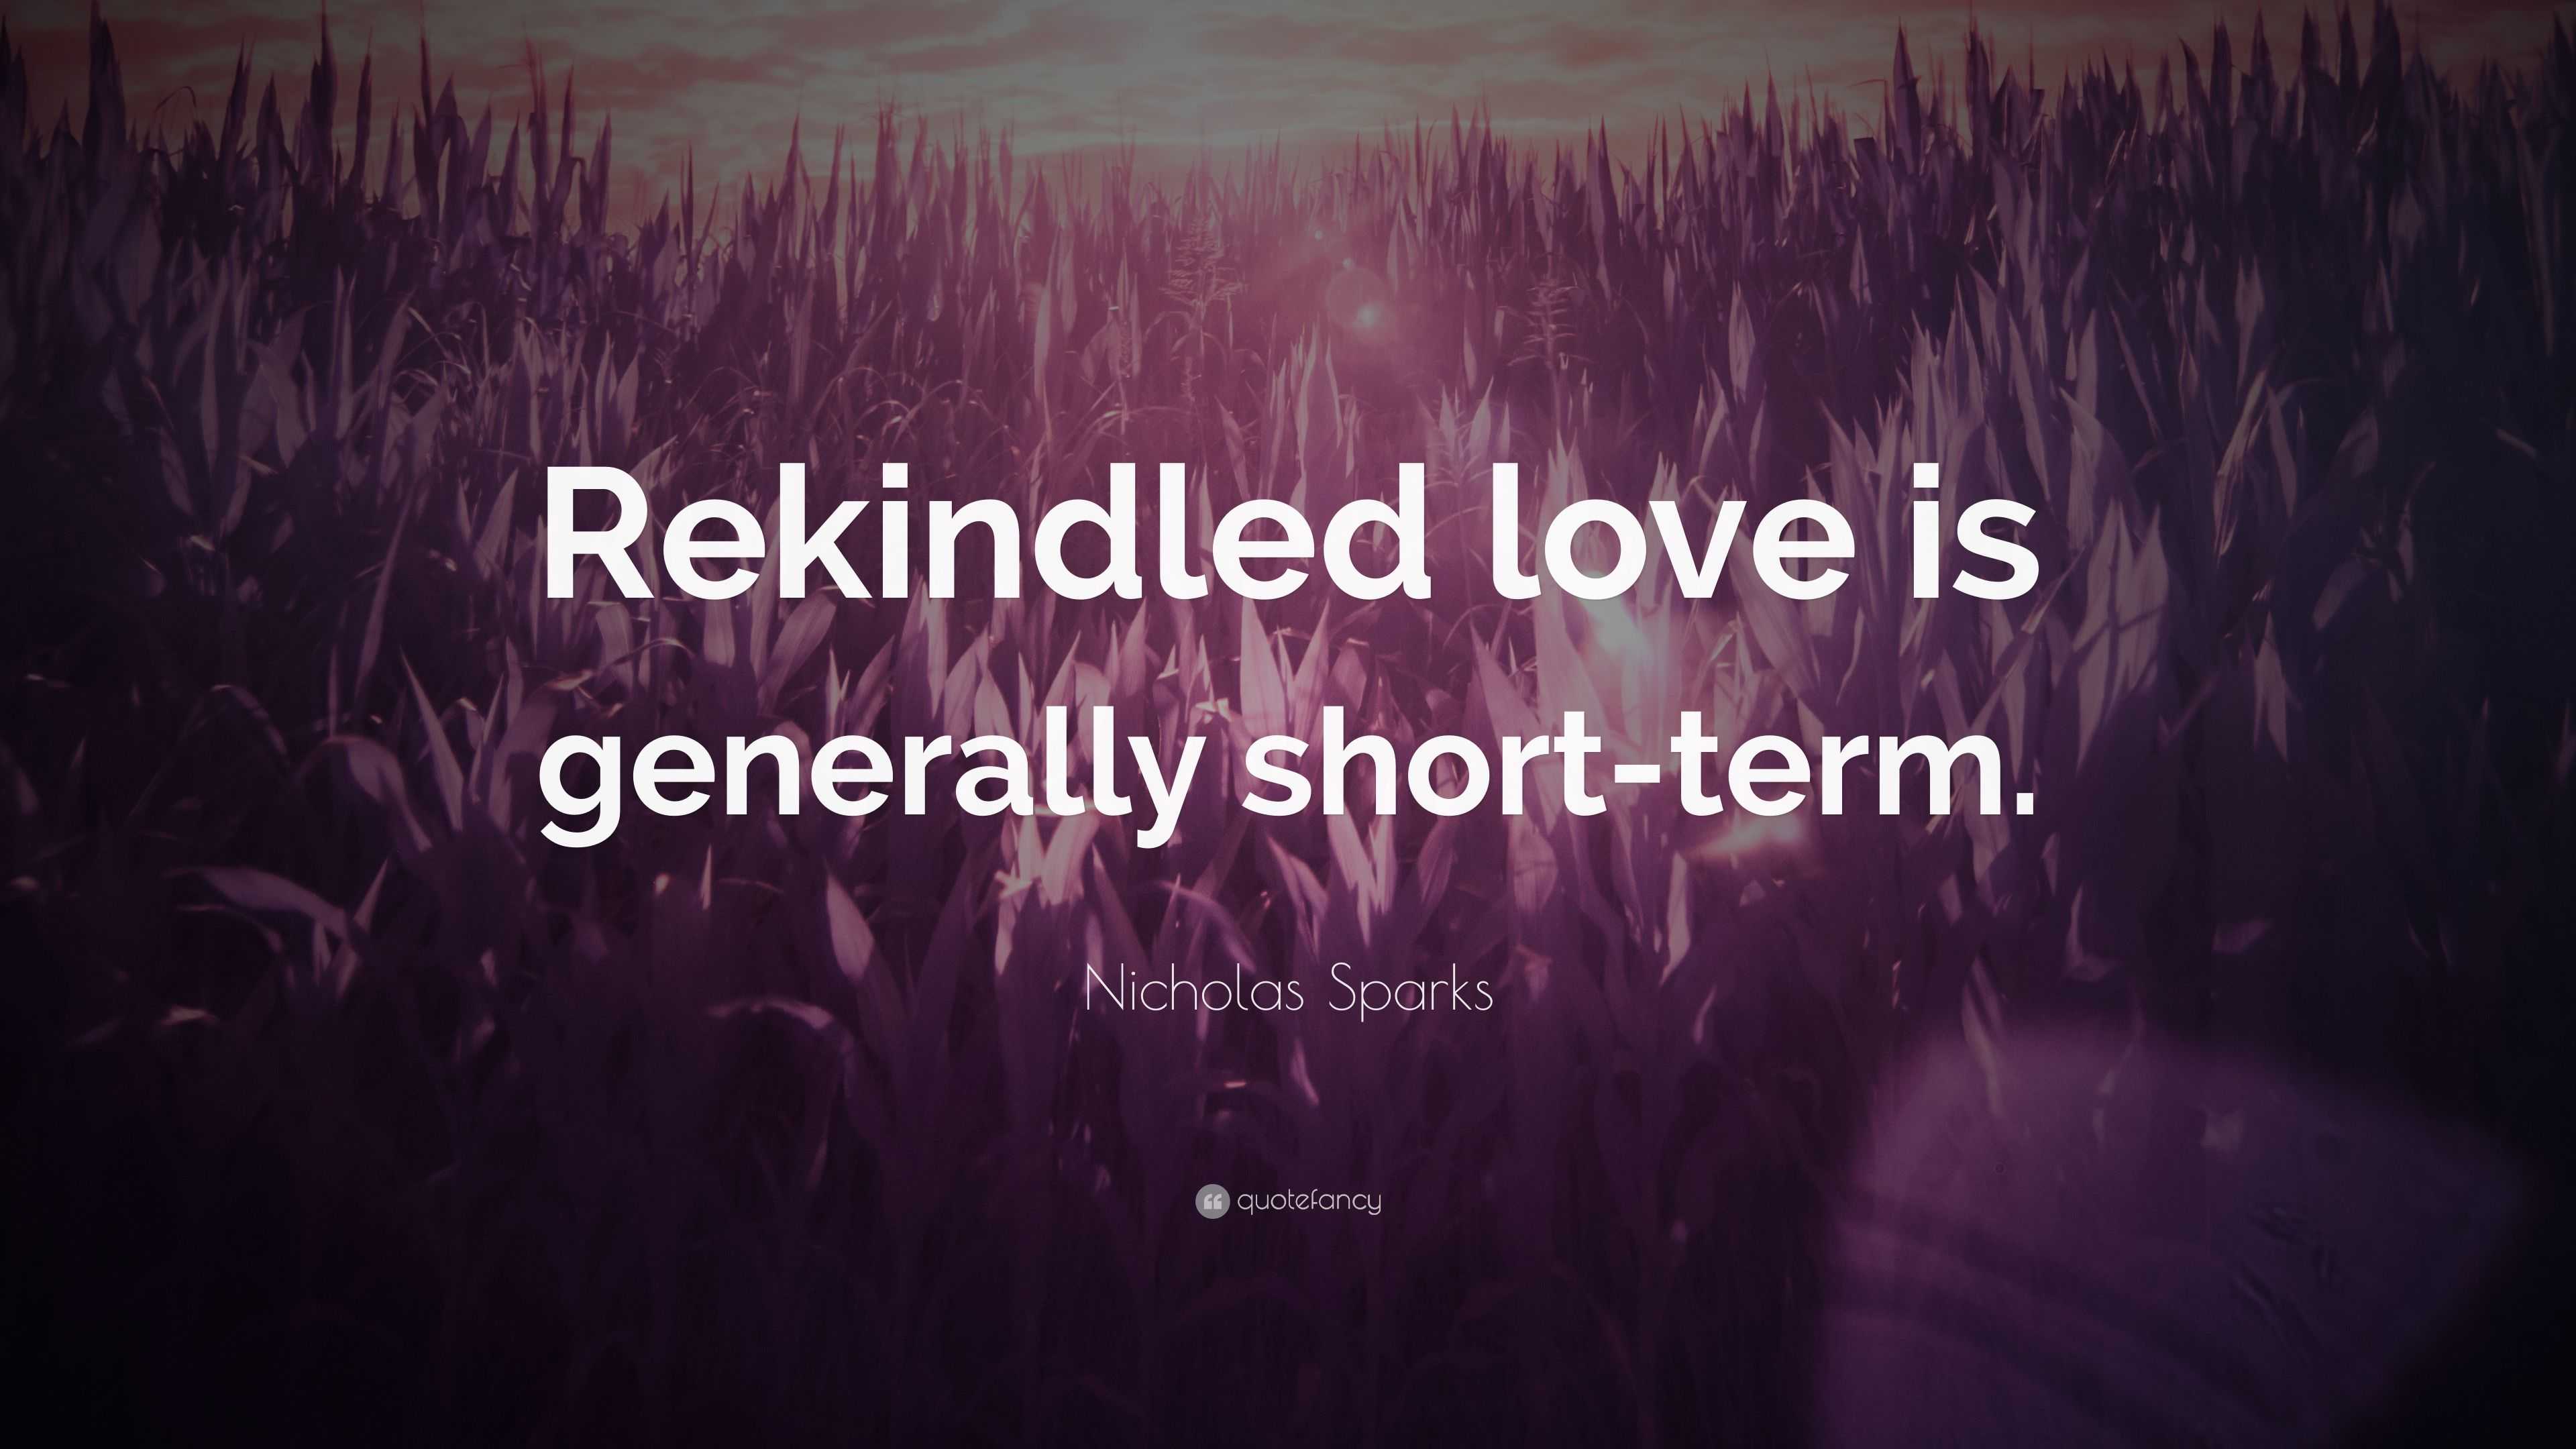 Nicholas Sparks Quote “Rekindled love is generally short term ”